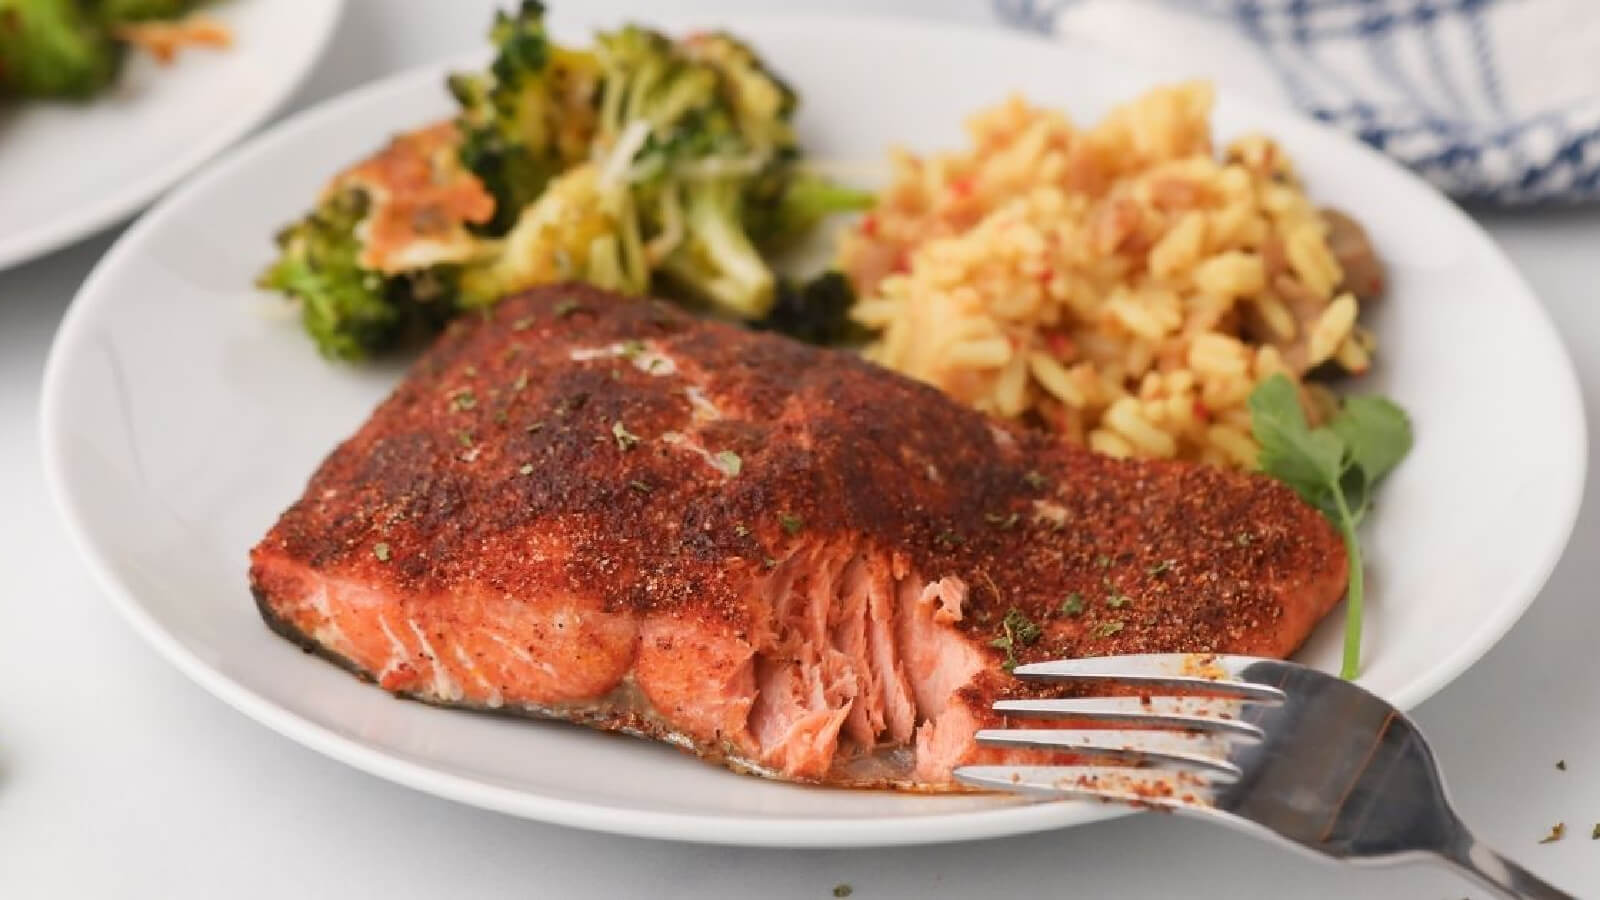 Simple Salmon Filet seasoned and sir fried, then served on a white plate with a side of brocolli and rice in the background, with a fork at the front of the plate.